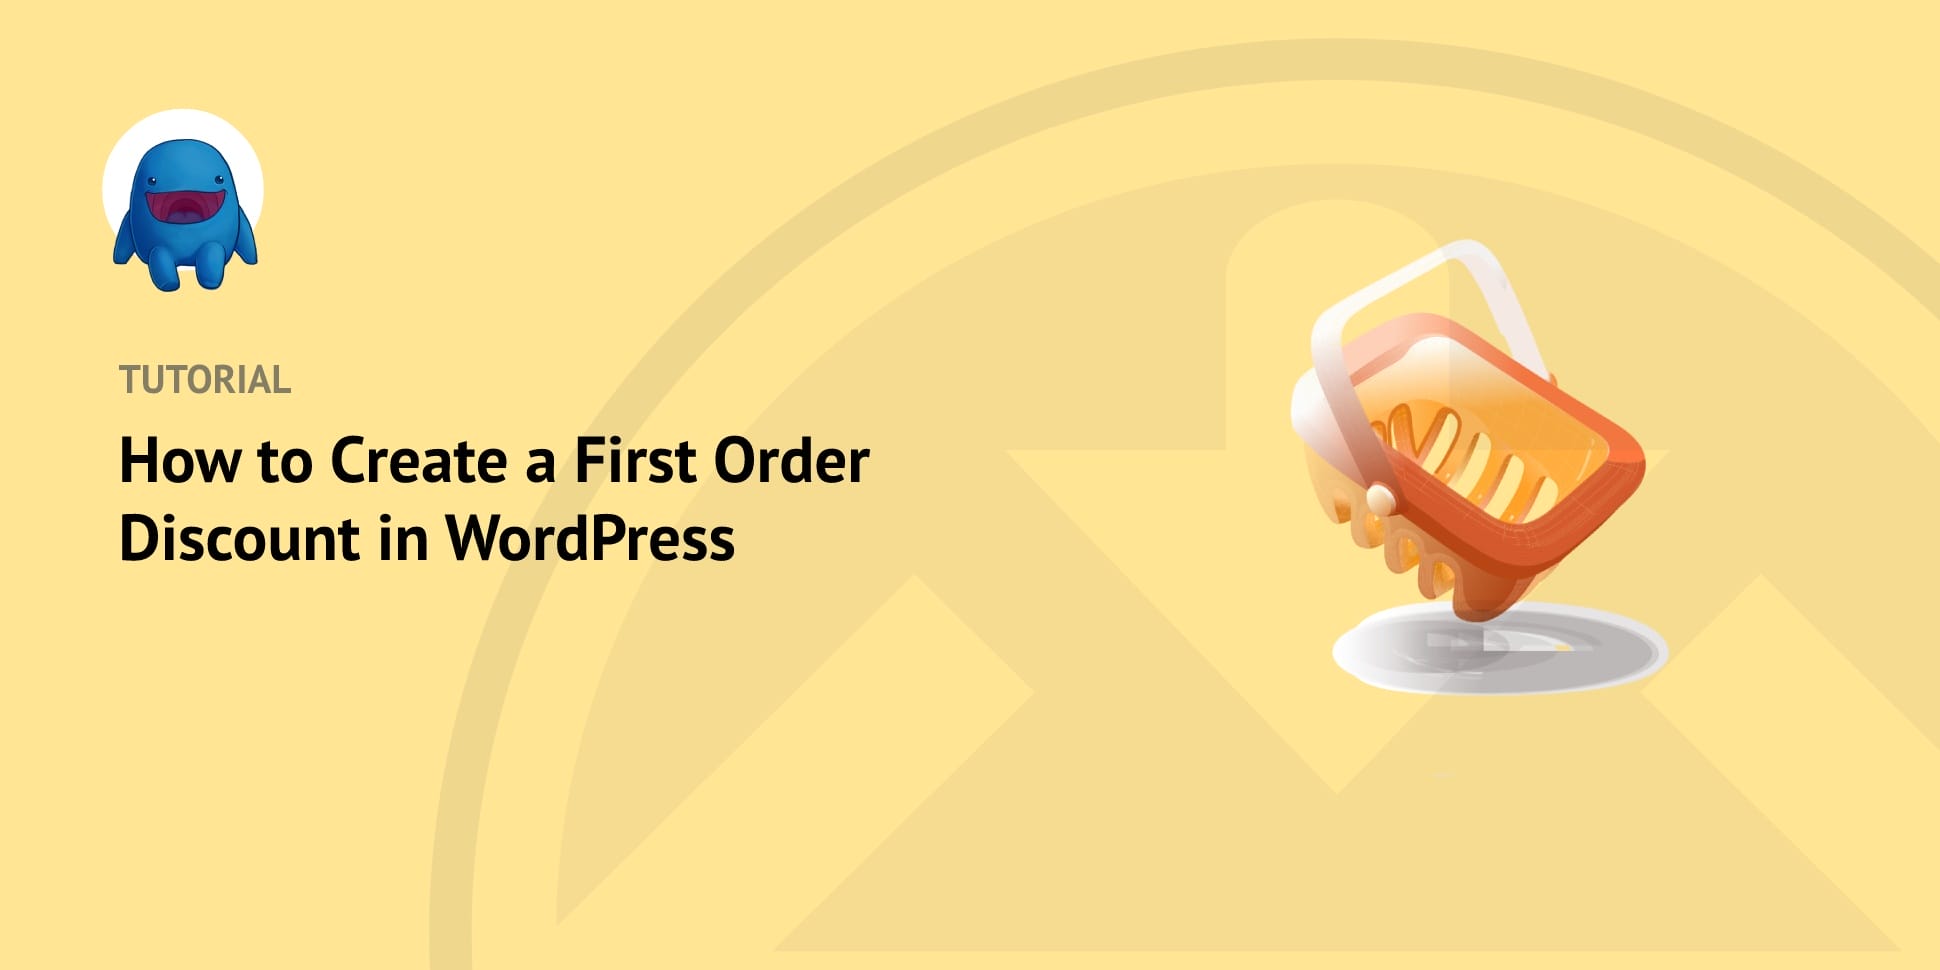 How to Create a First Order Discount in WordPress